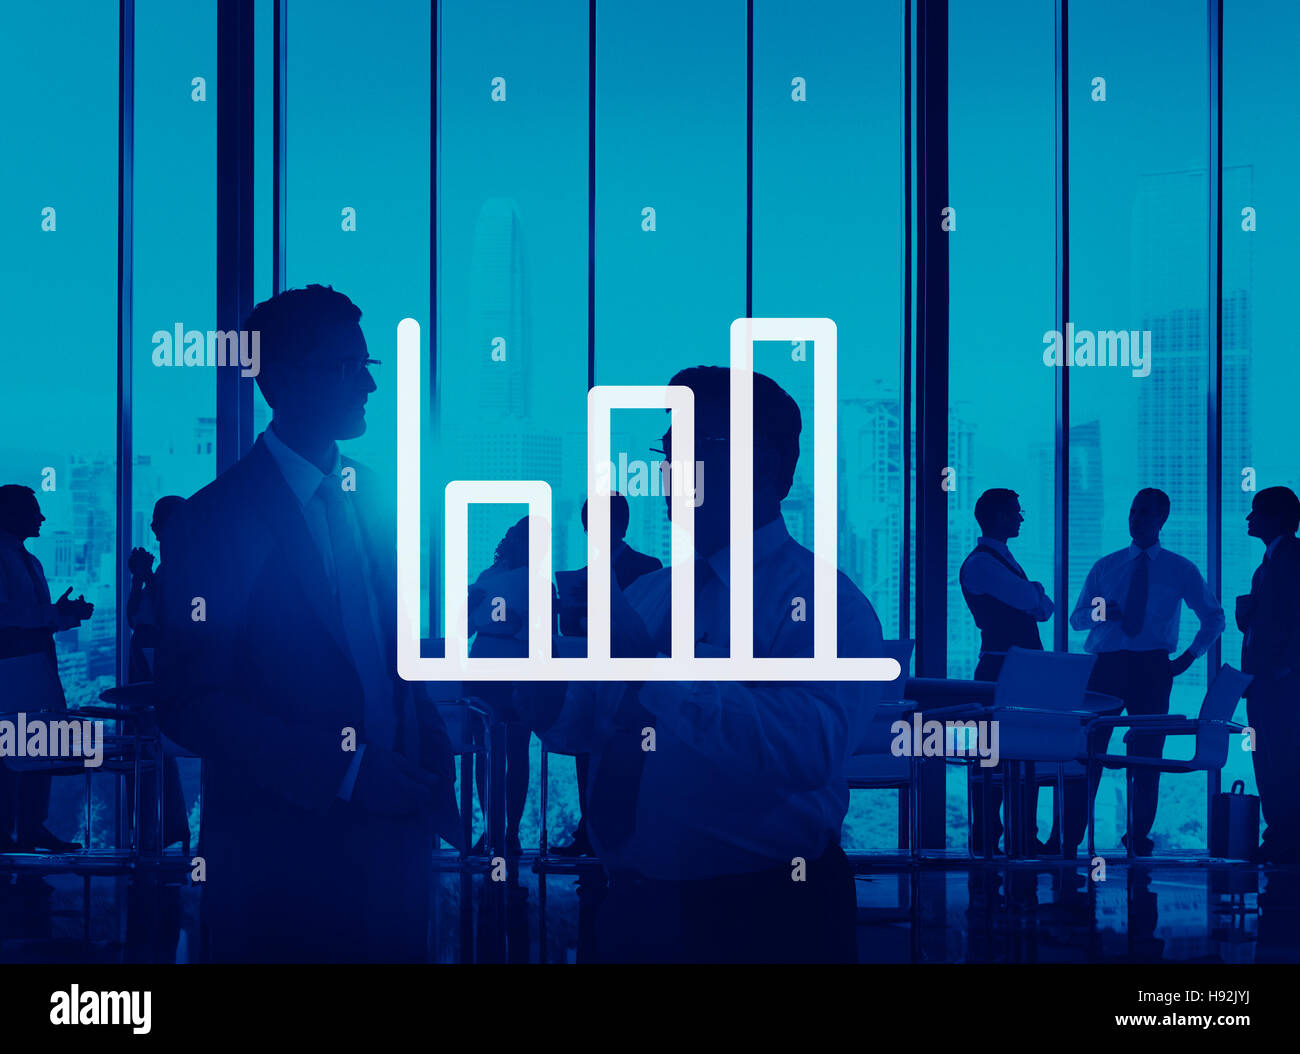 Bar Graph Marketing Analyzing Growth Increase Concept Stock Photo